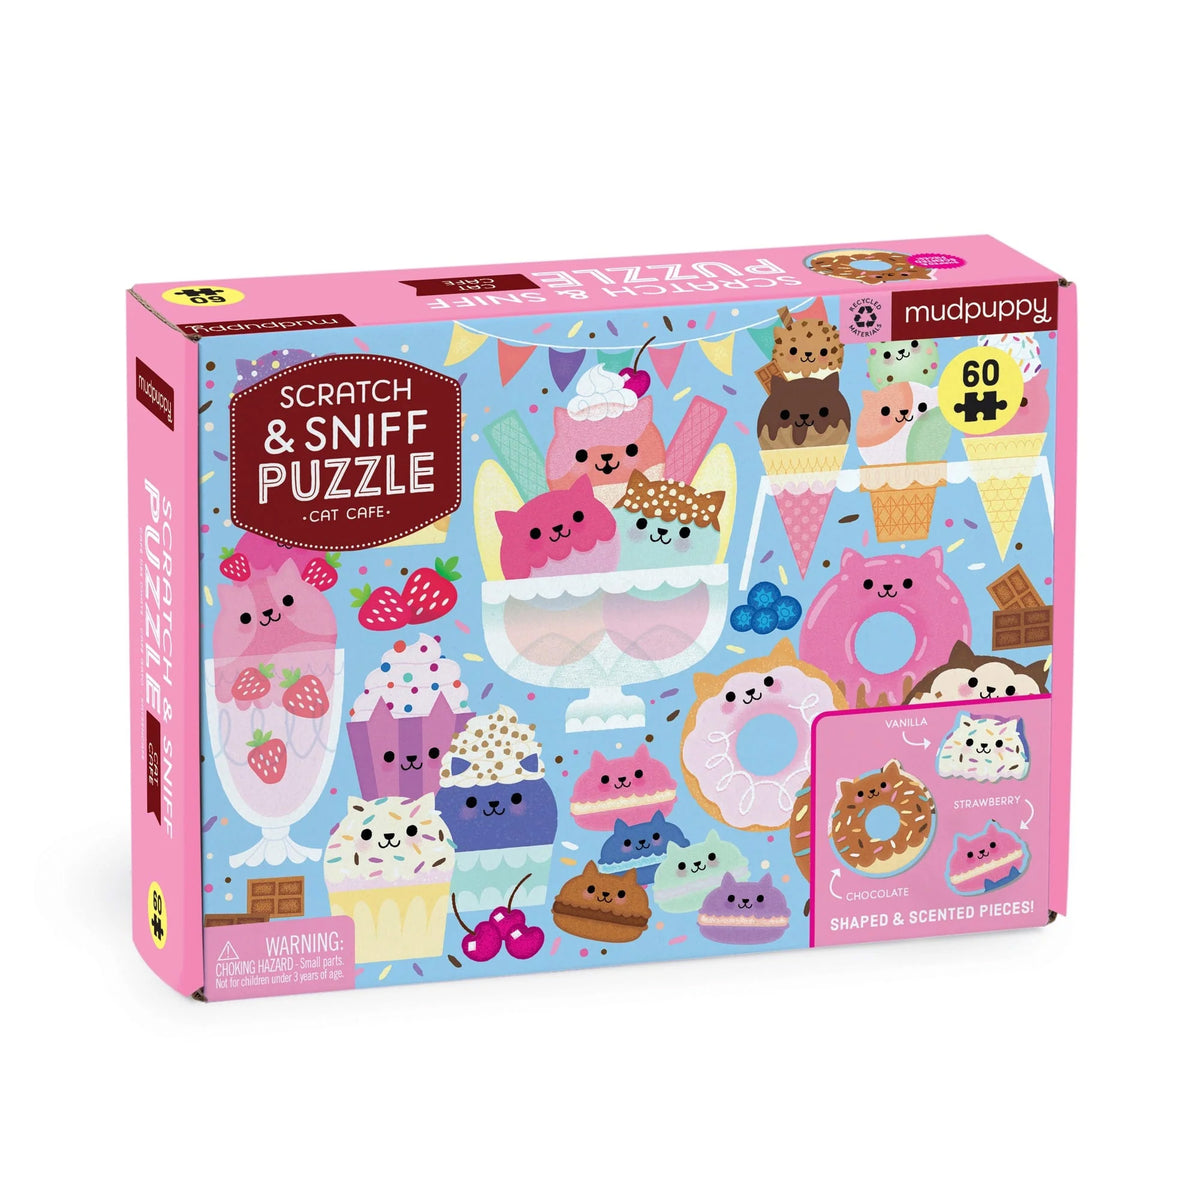 Mudpuppy Scratch and Sniff Puzzle - Cat Cafe